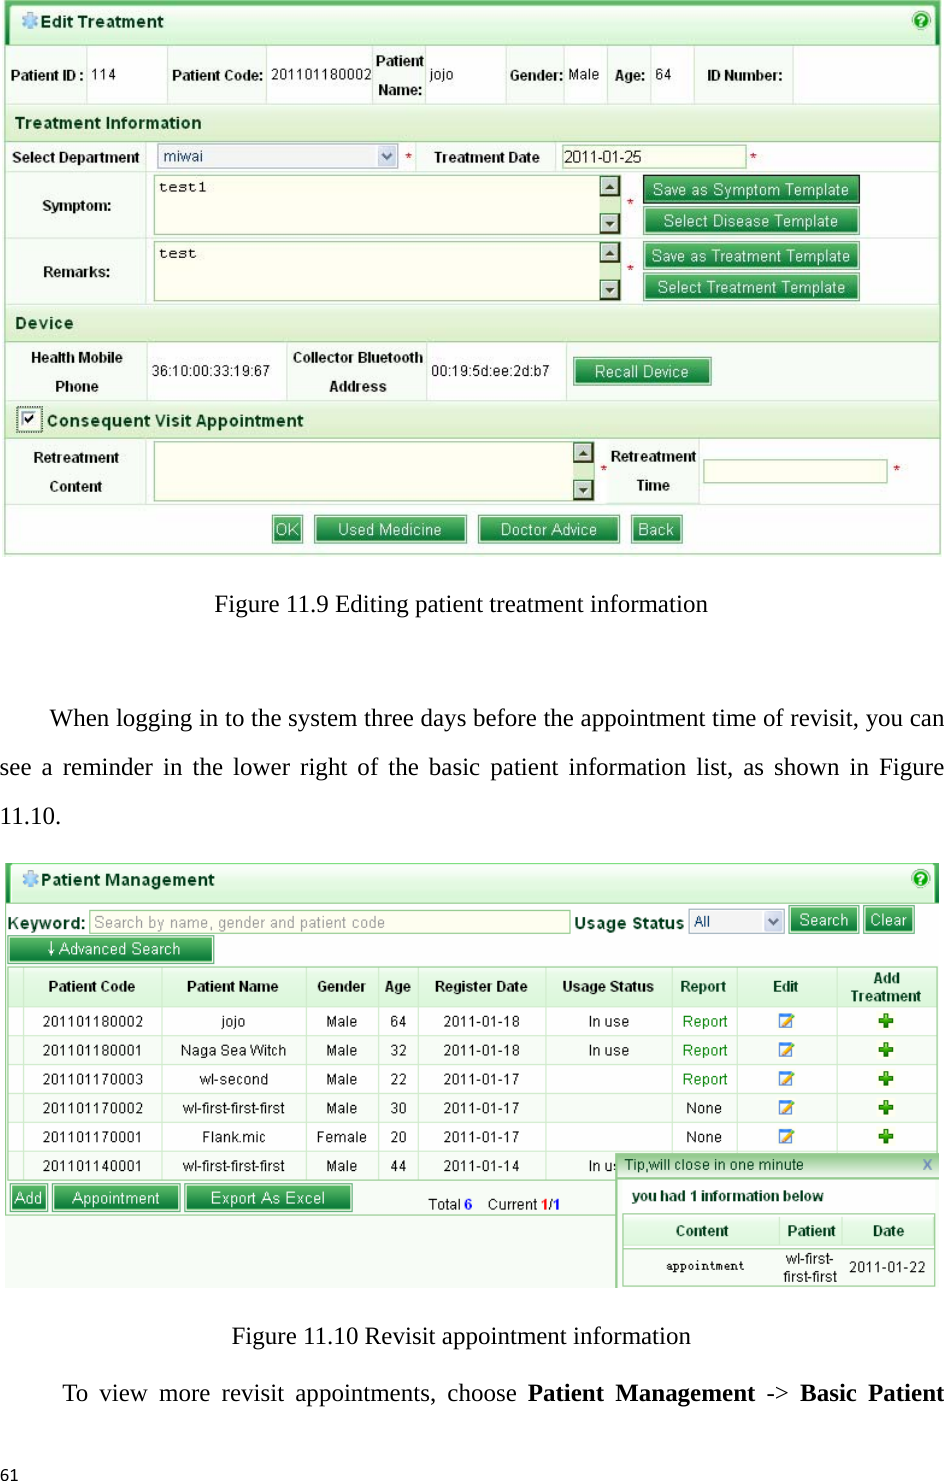 61 Figure 11.9 Editing patient treatment information    When logging in to the system three days before the appointment time of revisit, you can see a reminder in the lower right of the basic patient information list, as shown in Figure 11.10.   Figure 11.10 Revisit appointment information To view more revisit appointments, choose Patient Management -&gt; Basic Patient 